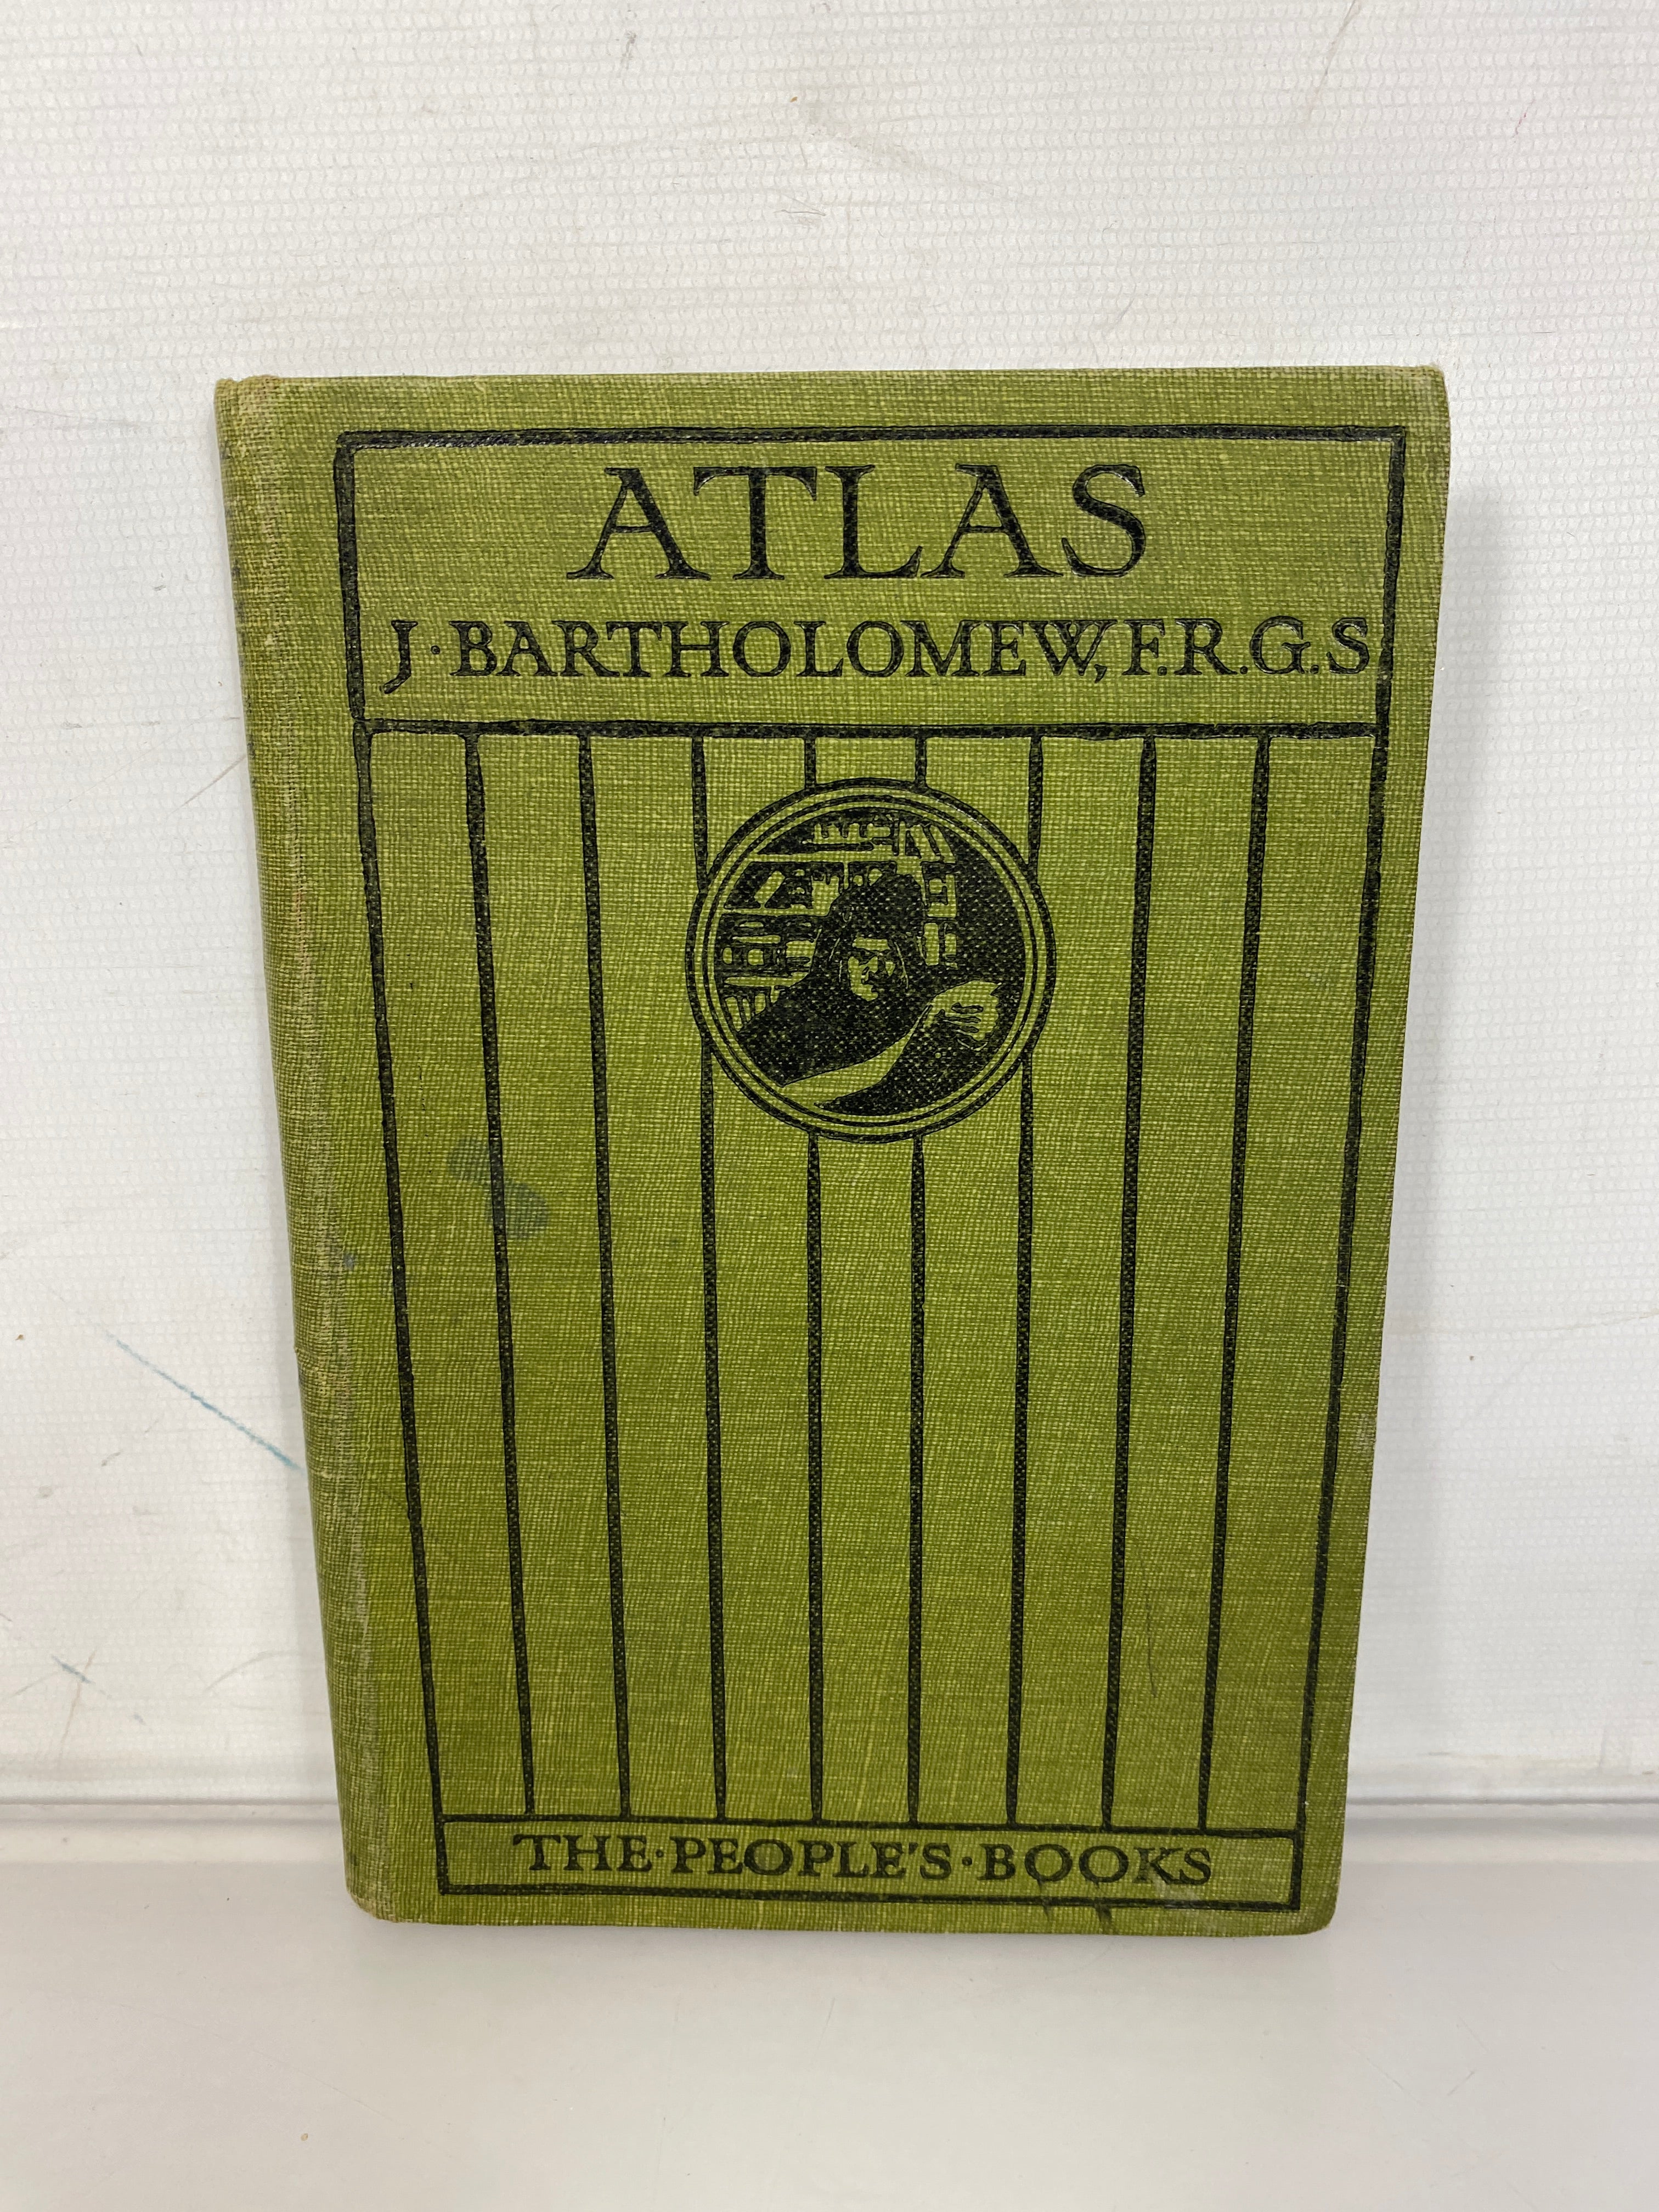 Small Antique Atlas of the World by J. Bartholomew c1915 The People's Books HC